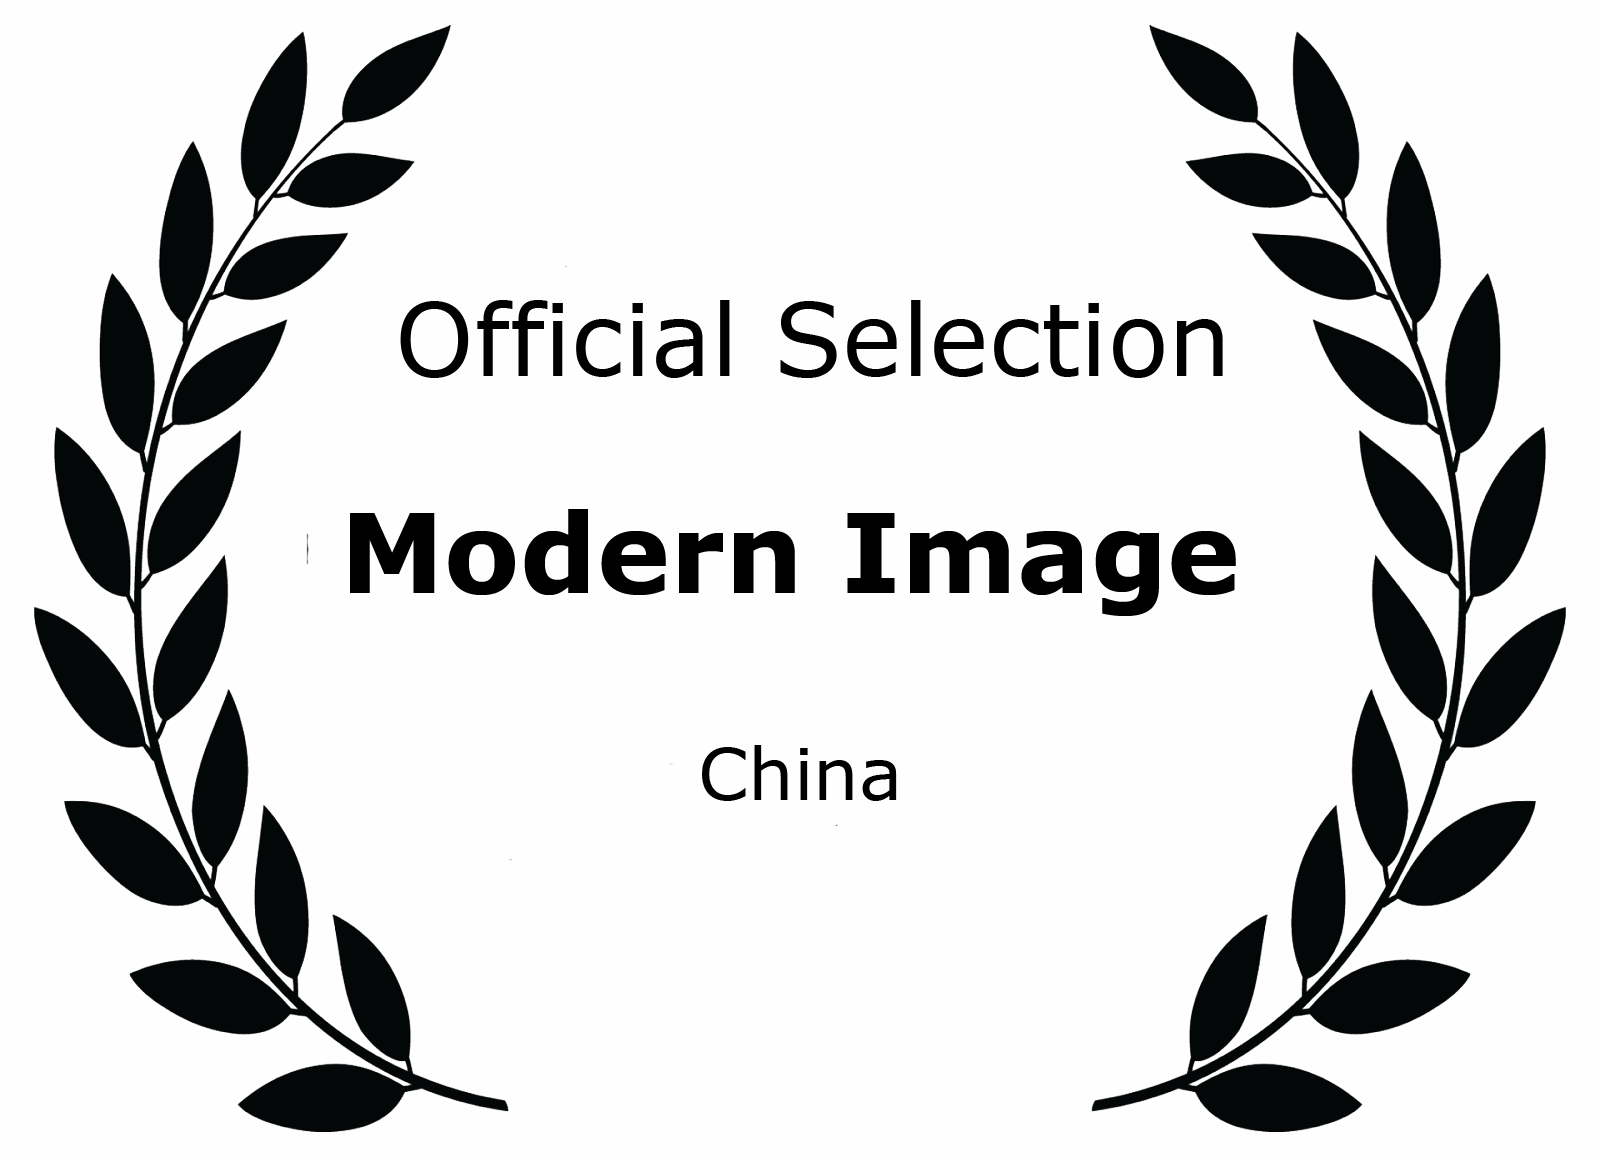 Official Selection Modern Image China 2010